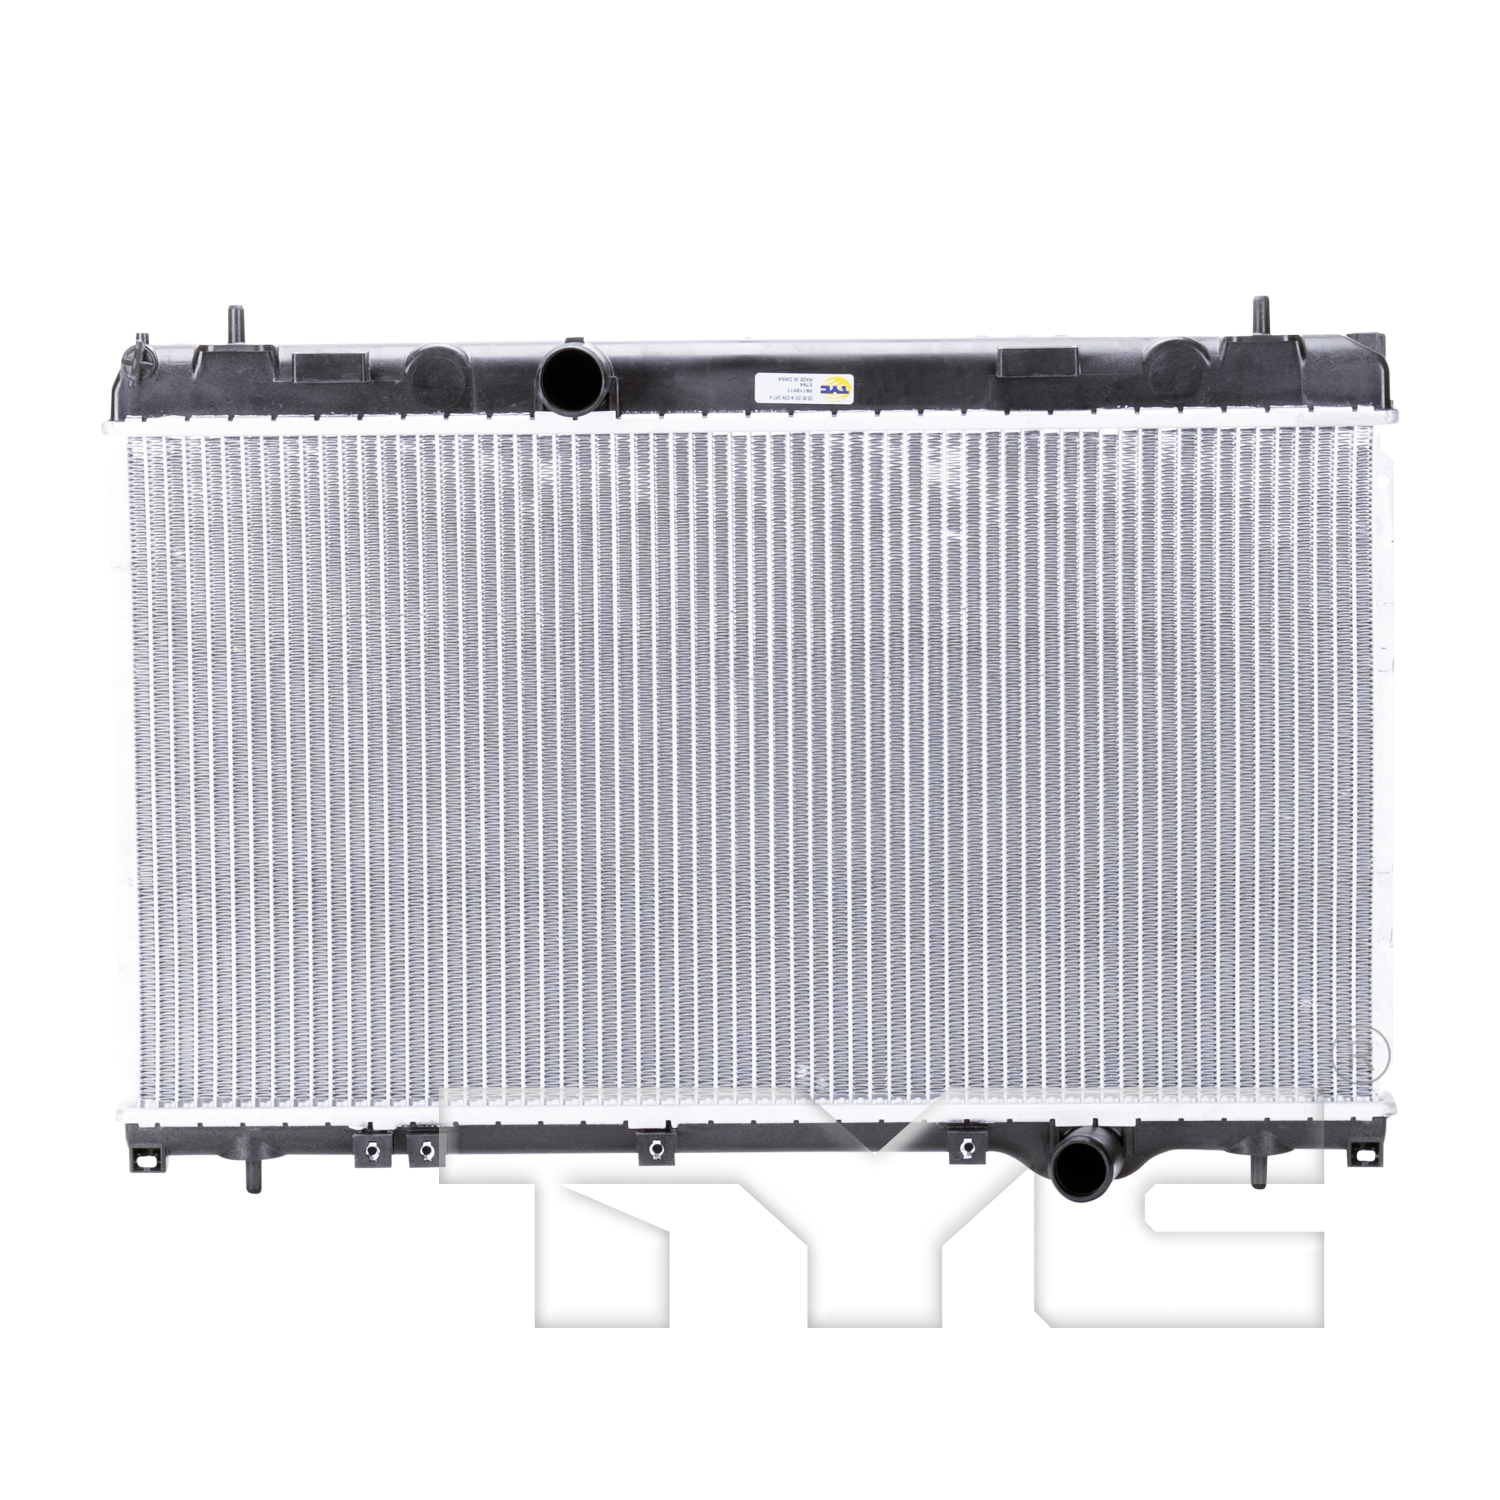 Aftermarket RADIATORS for DODGE - NEON, NEON,03-05,Radiator assembly